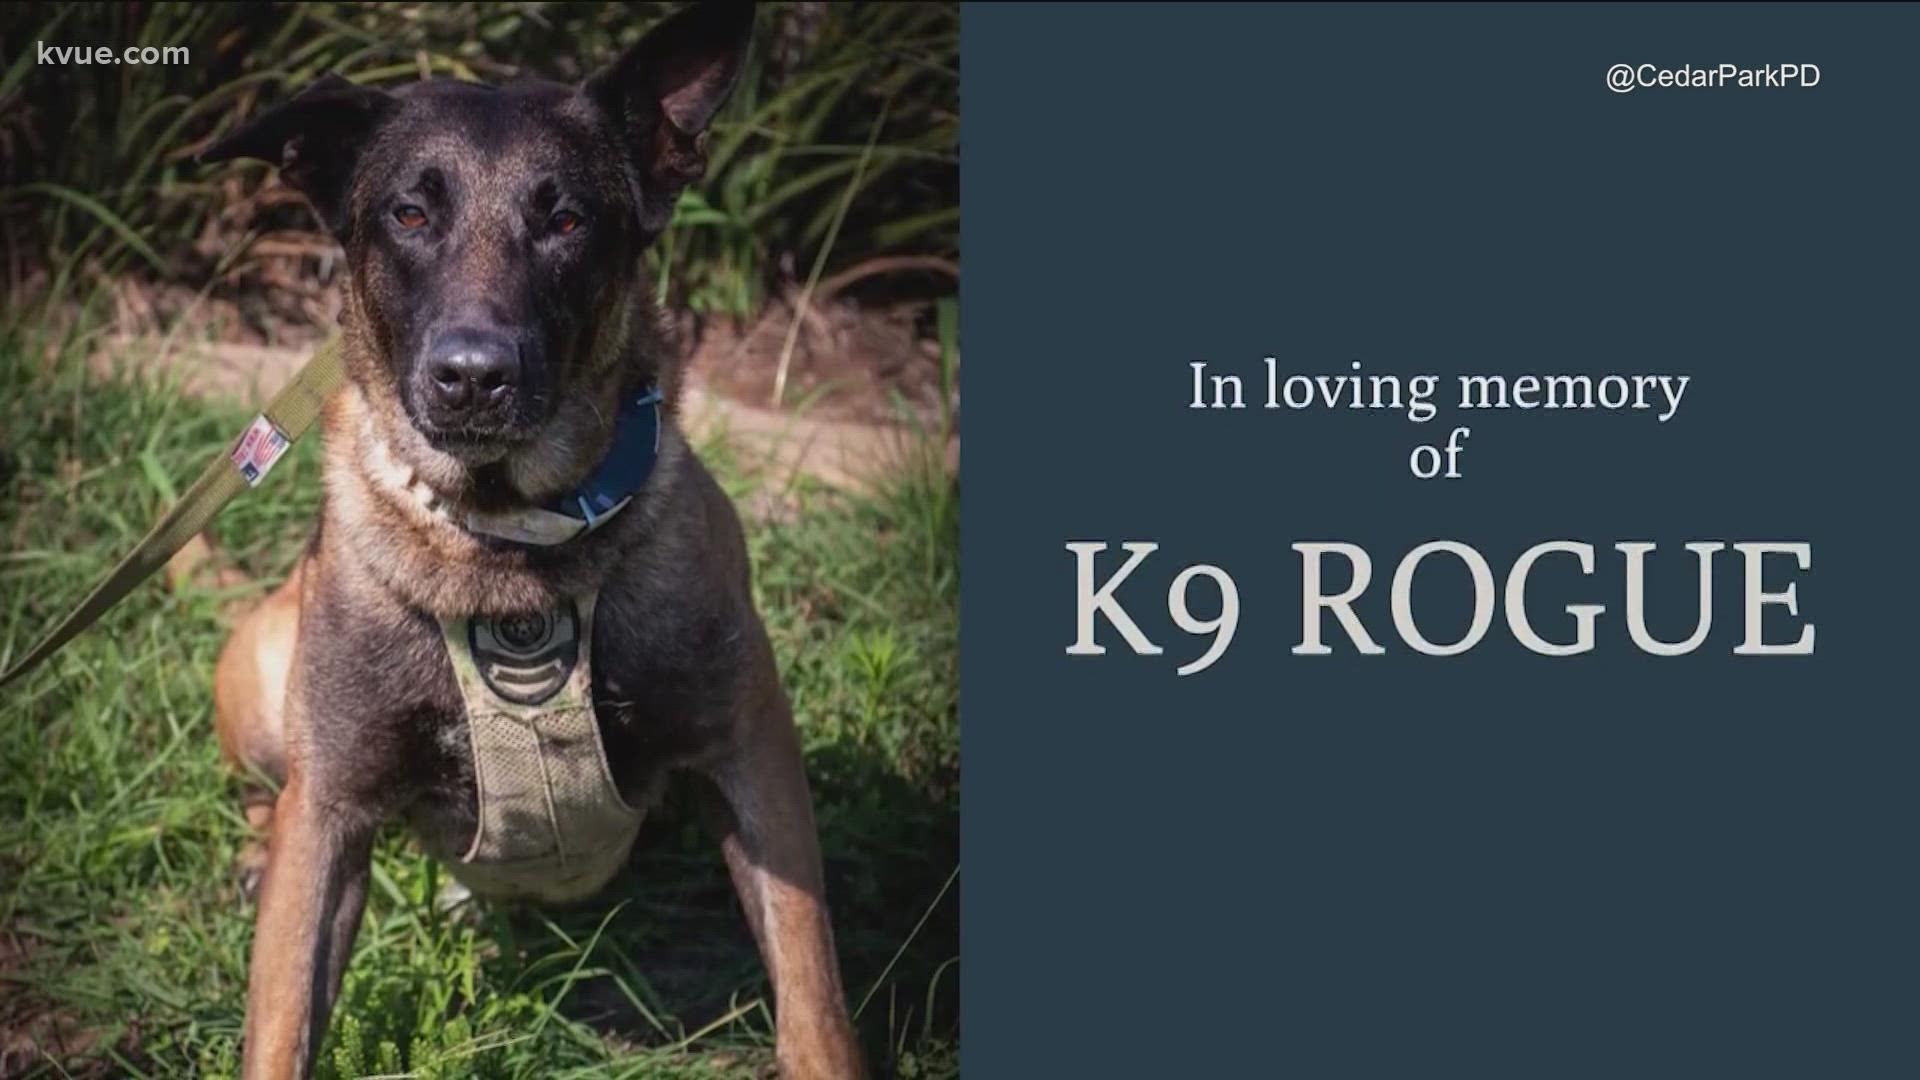 The Cedar Park Police Department is mourning the death of one of its four-legged officers.